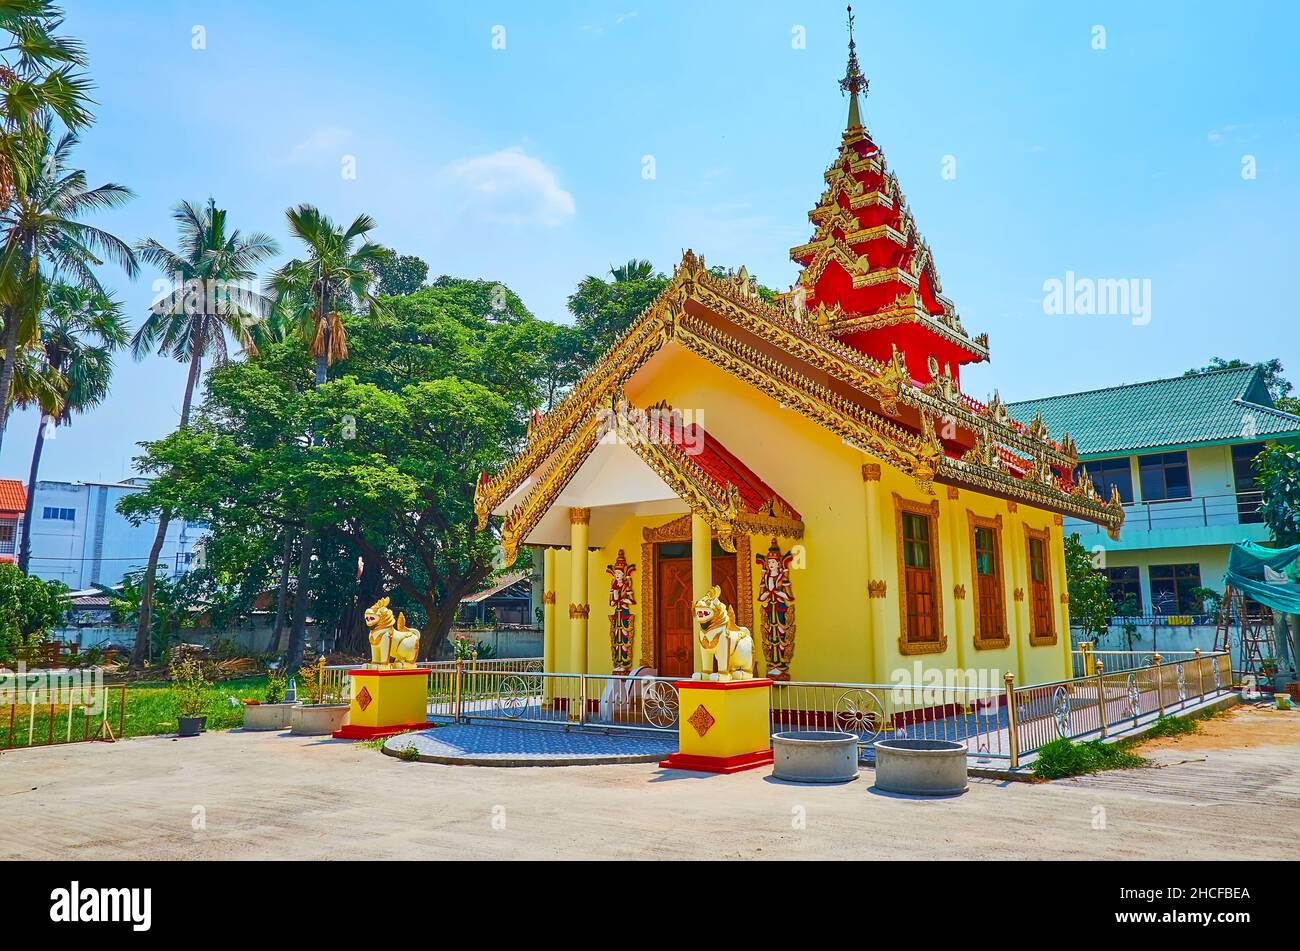 The facade of the scenic Burmese style Ubosot of Wat Sai Moon Myanmar temple, decorated with tall pyathat tower, gable roof, carved gilt bargeboards, Stock Photo